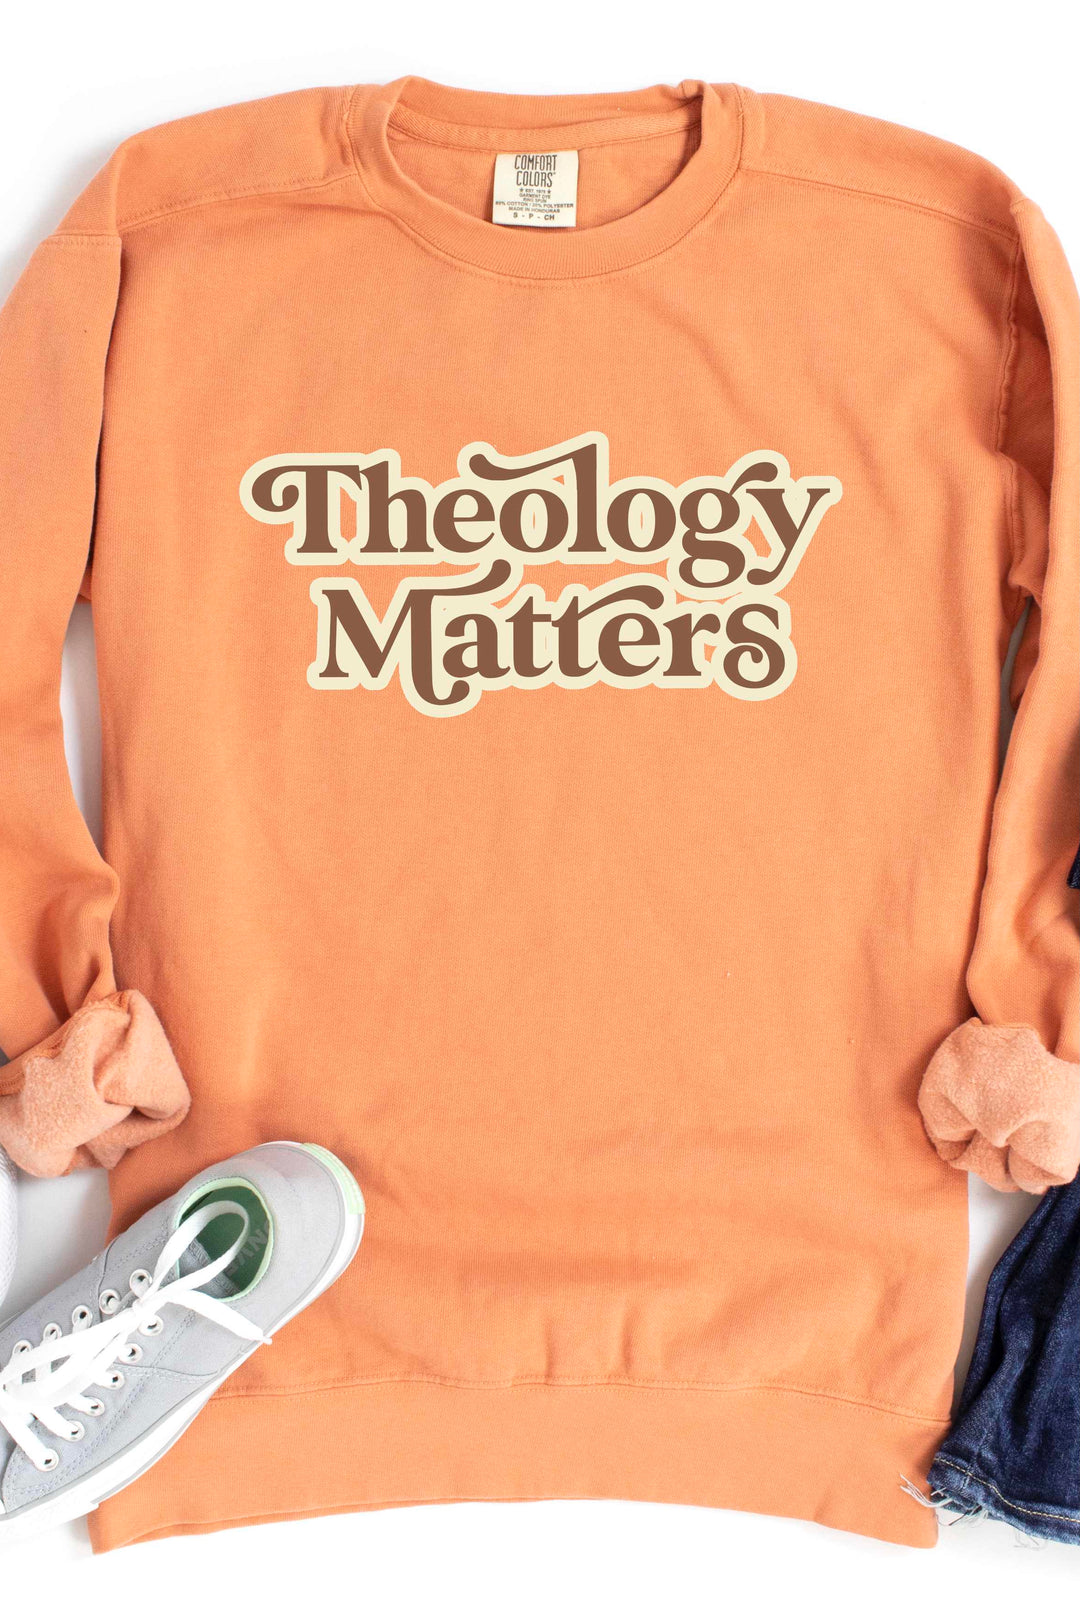 Groovy "Theology Matters" Crewneck Pullover